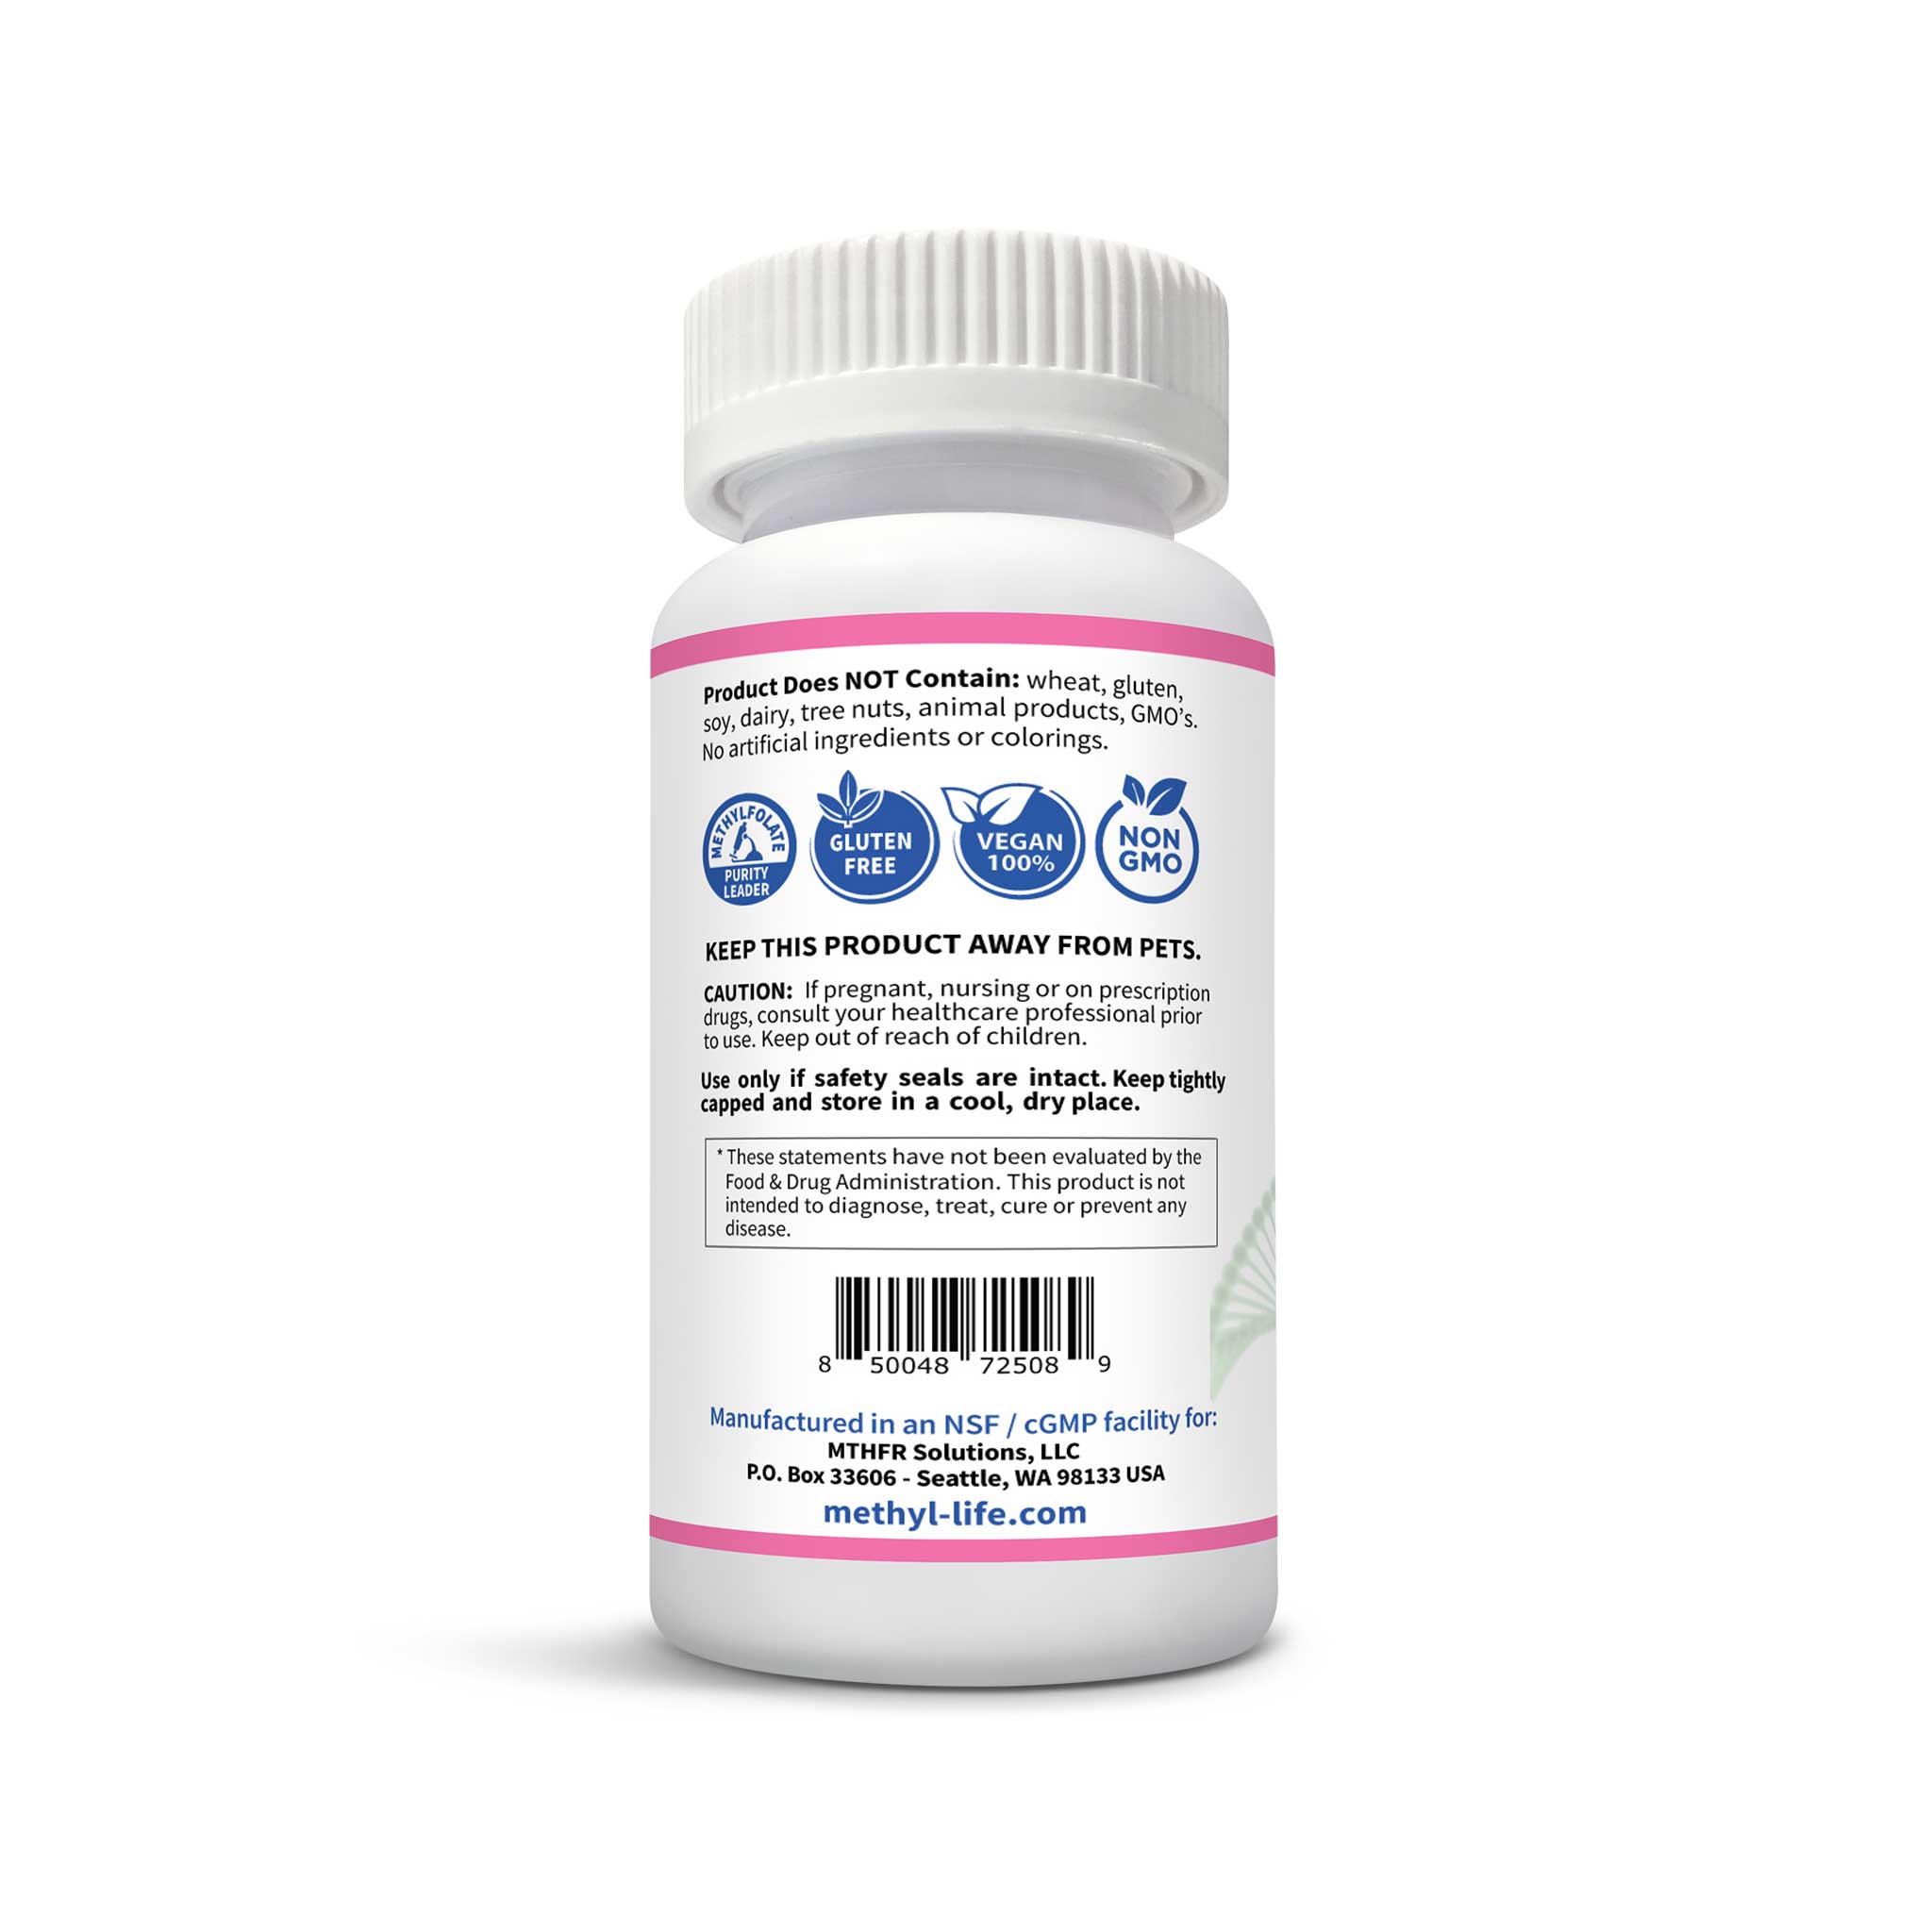 Vitamin B12 - Hydroxocobalamin - well-tolerated bioavailable form - bottle with barcode - 90 chewables - Methyl-Life